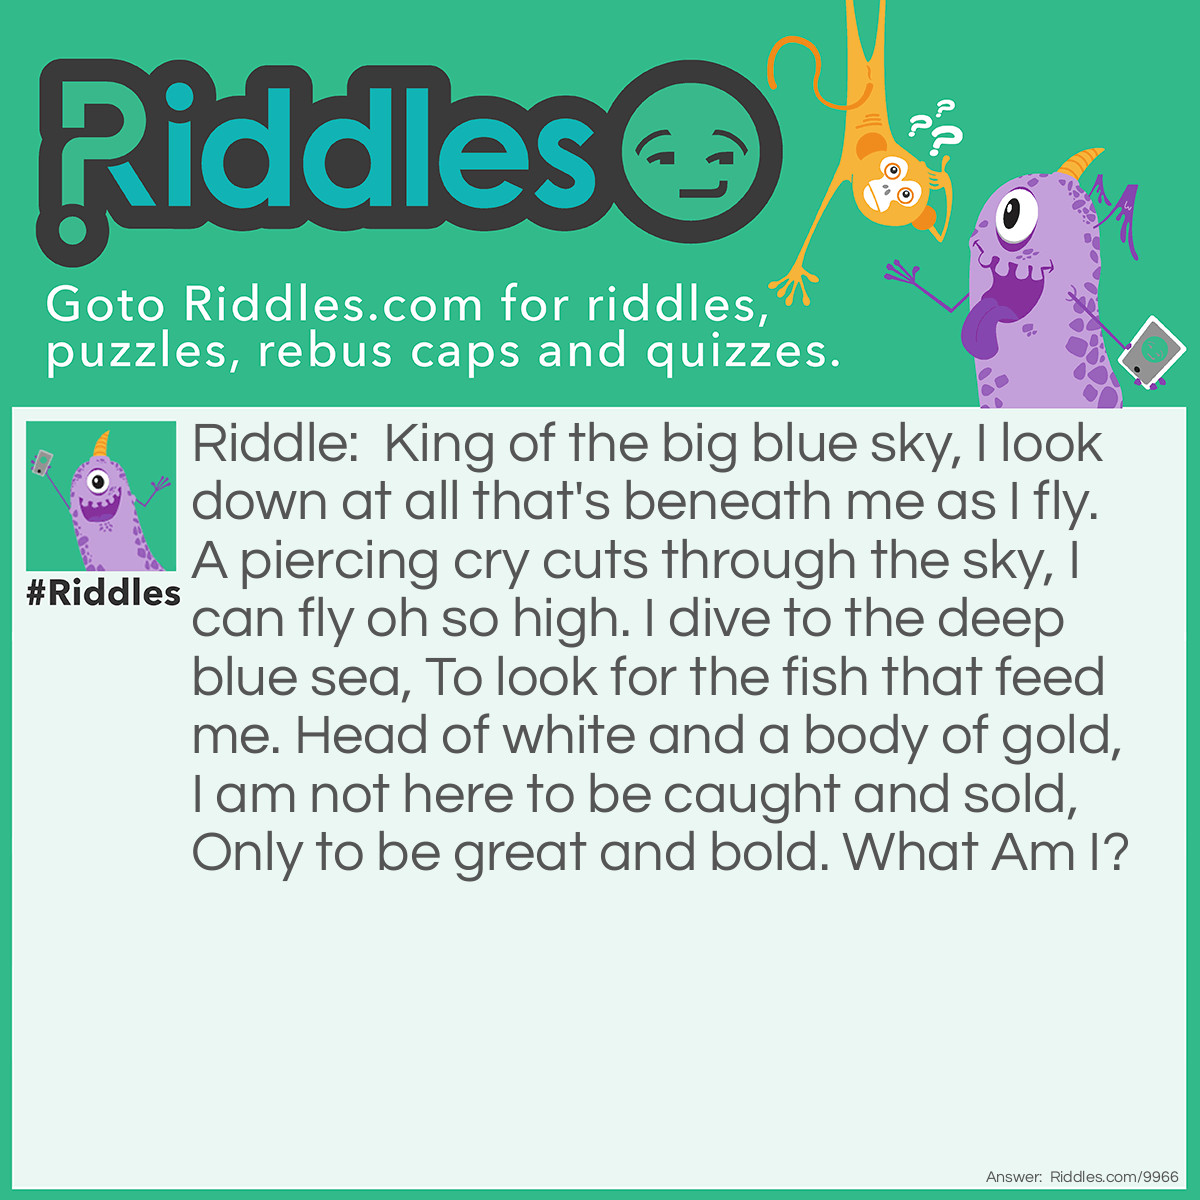 Riddle: King of the big blue sky, I look down at all that's beneath me as I fly. A piercing cry cuts through the sky, I can fly oh so high. I dive to the deep blue sea, To look for the fish that feed me. Head of white and a body of gold, I am not here to be caught and sold, Only to be great and bold. What Am I? Answer: I'm a bald eagle